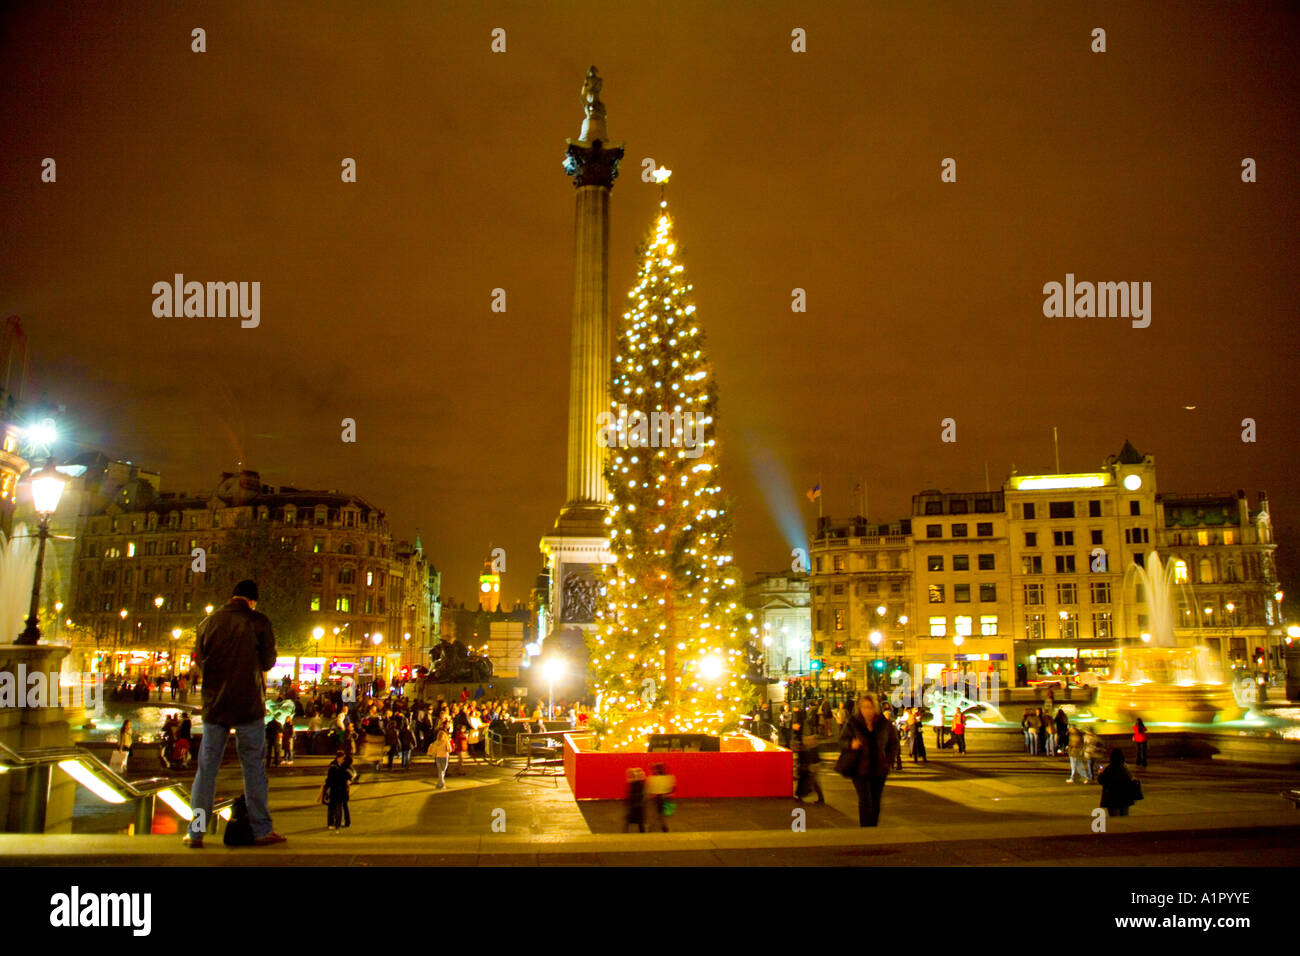 Traditional christmas tree set in Trafalgar Square in London next to Nelson's column. Stock Photo